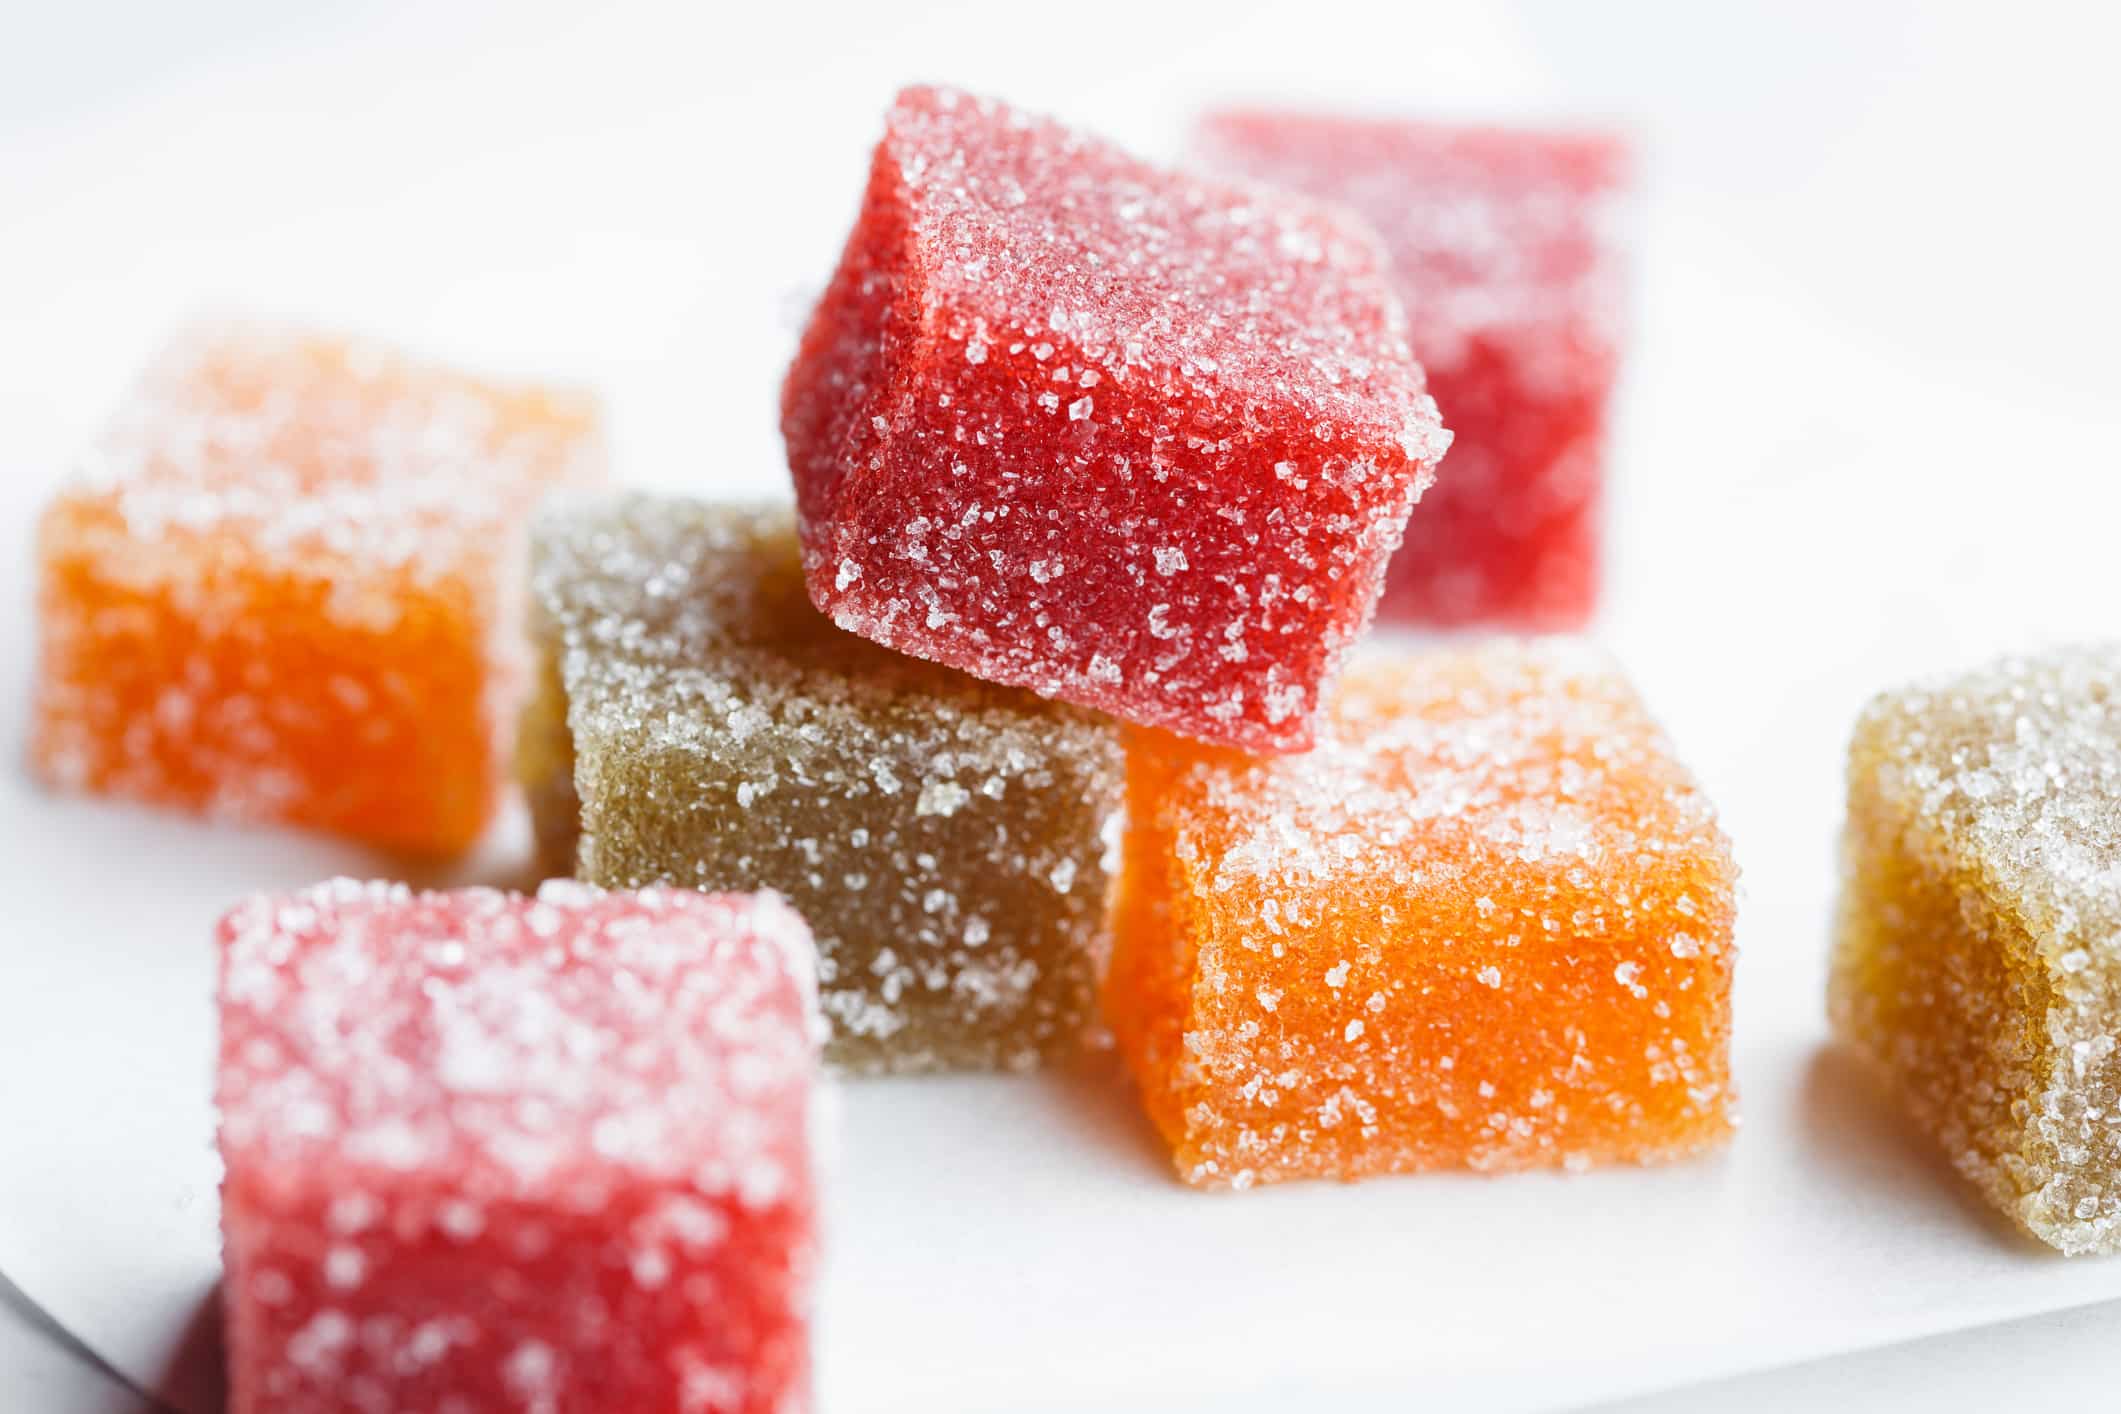 Shop The Best Edibles in New England